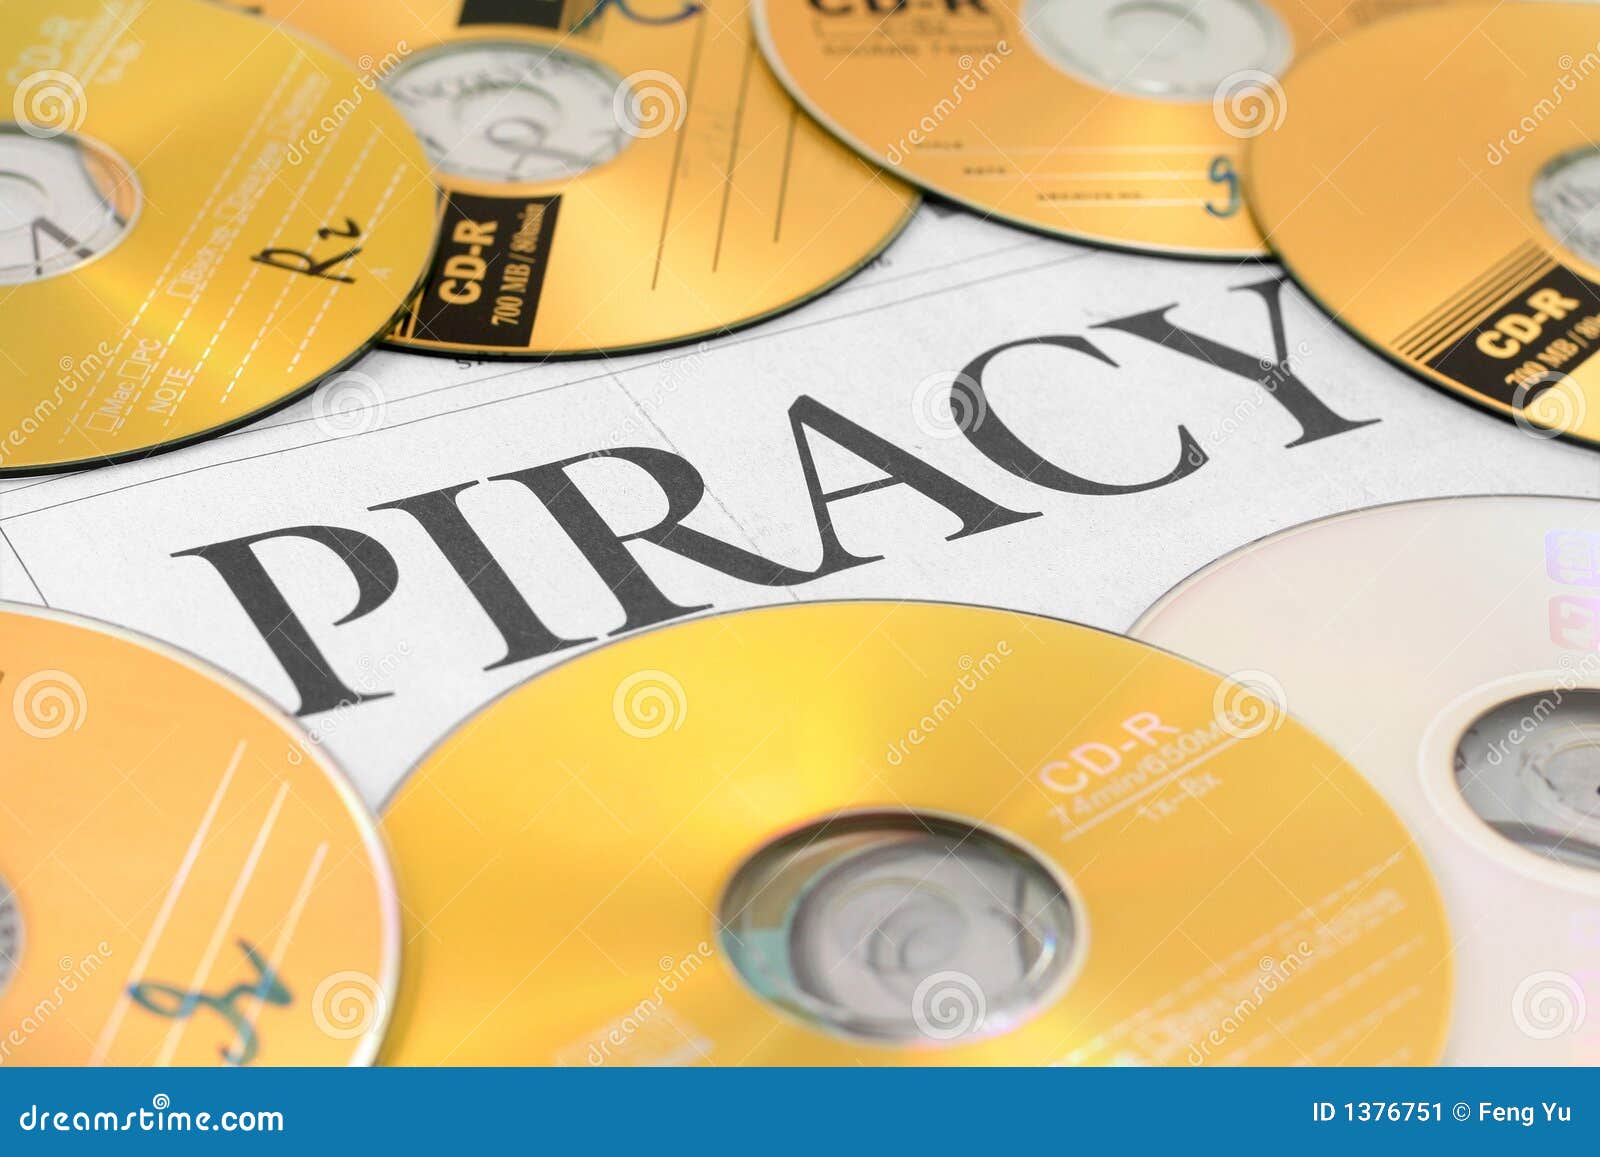 cd and word of piracy